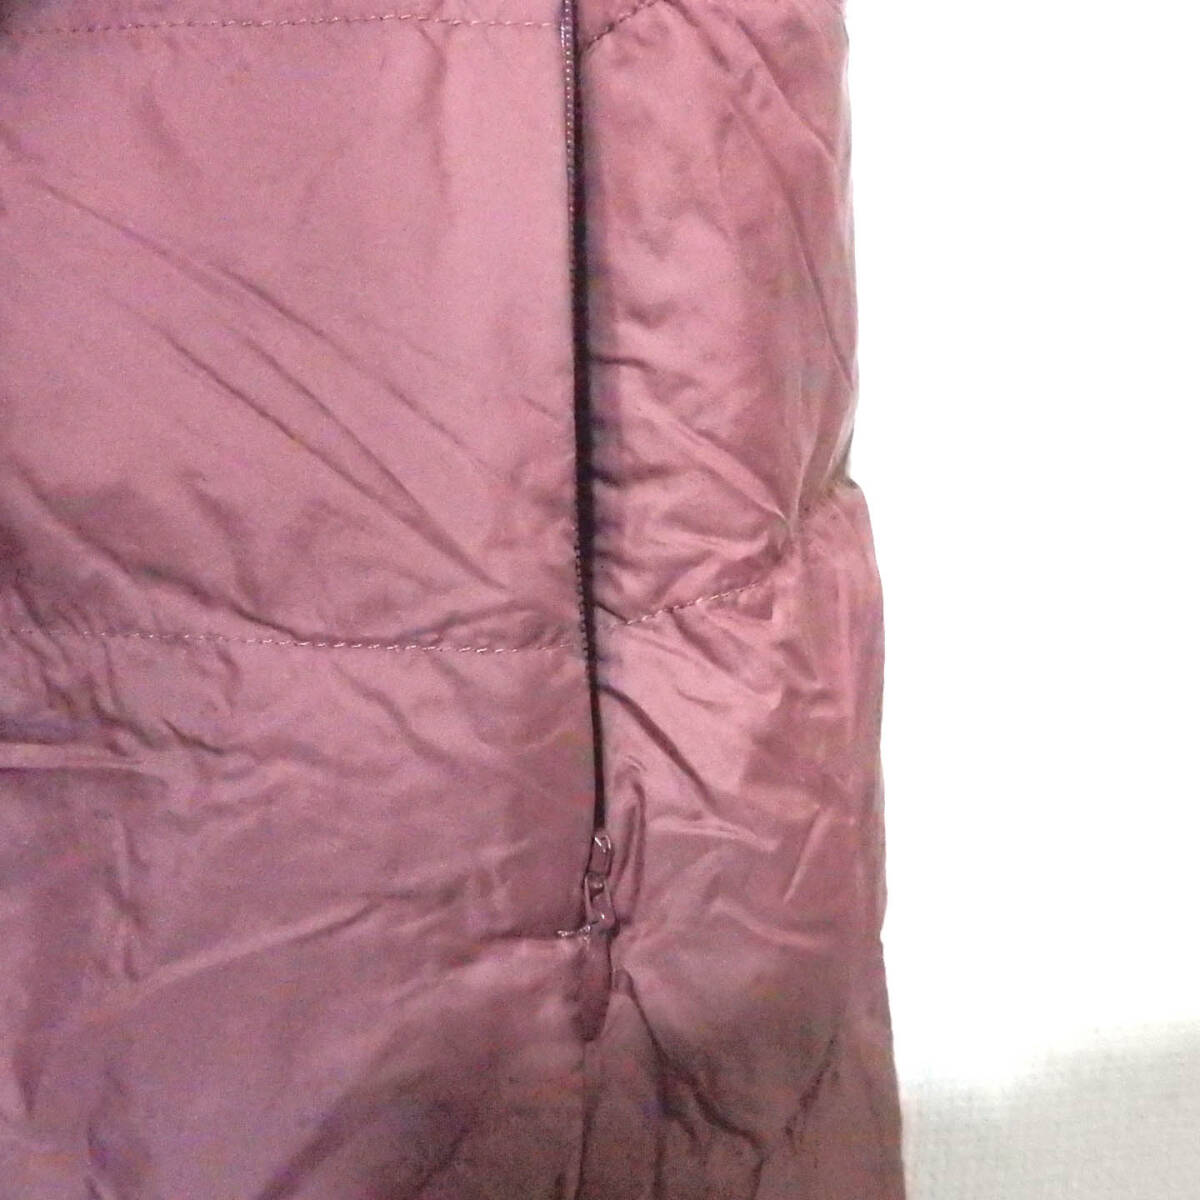 [ free shipping ] Uniqlo Ultra light down jacket / coat lady's S size adzuki bean color B8 down 90% feather 10%